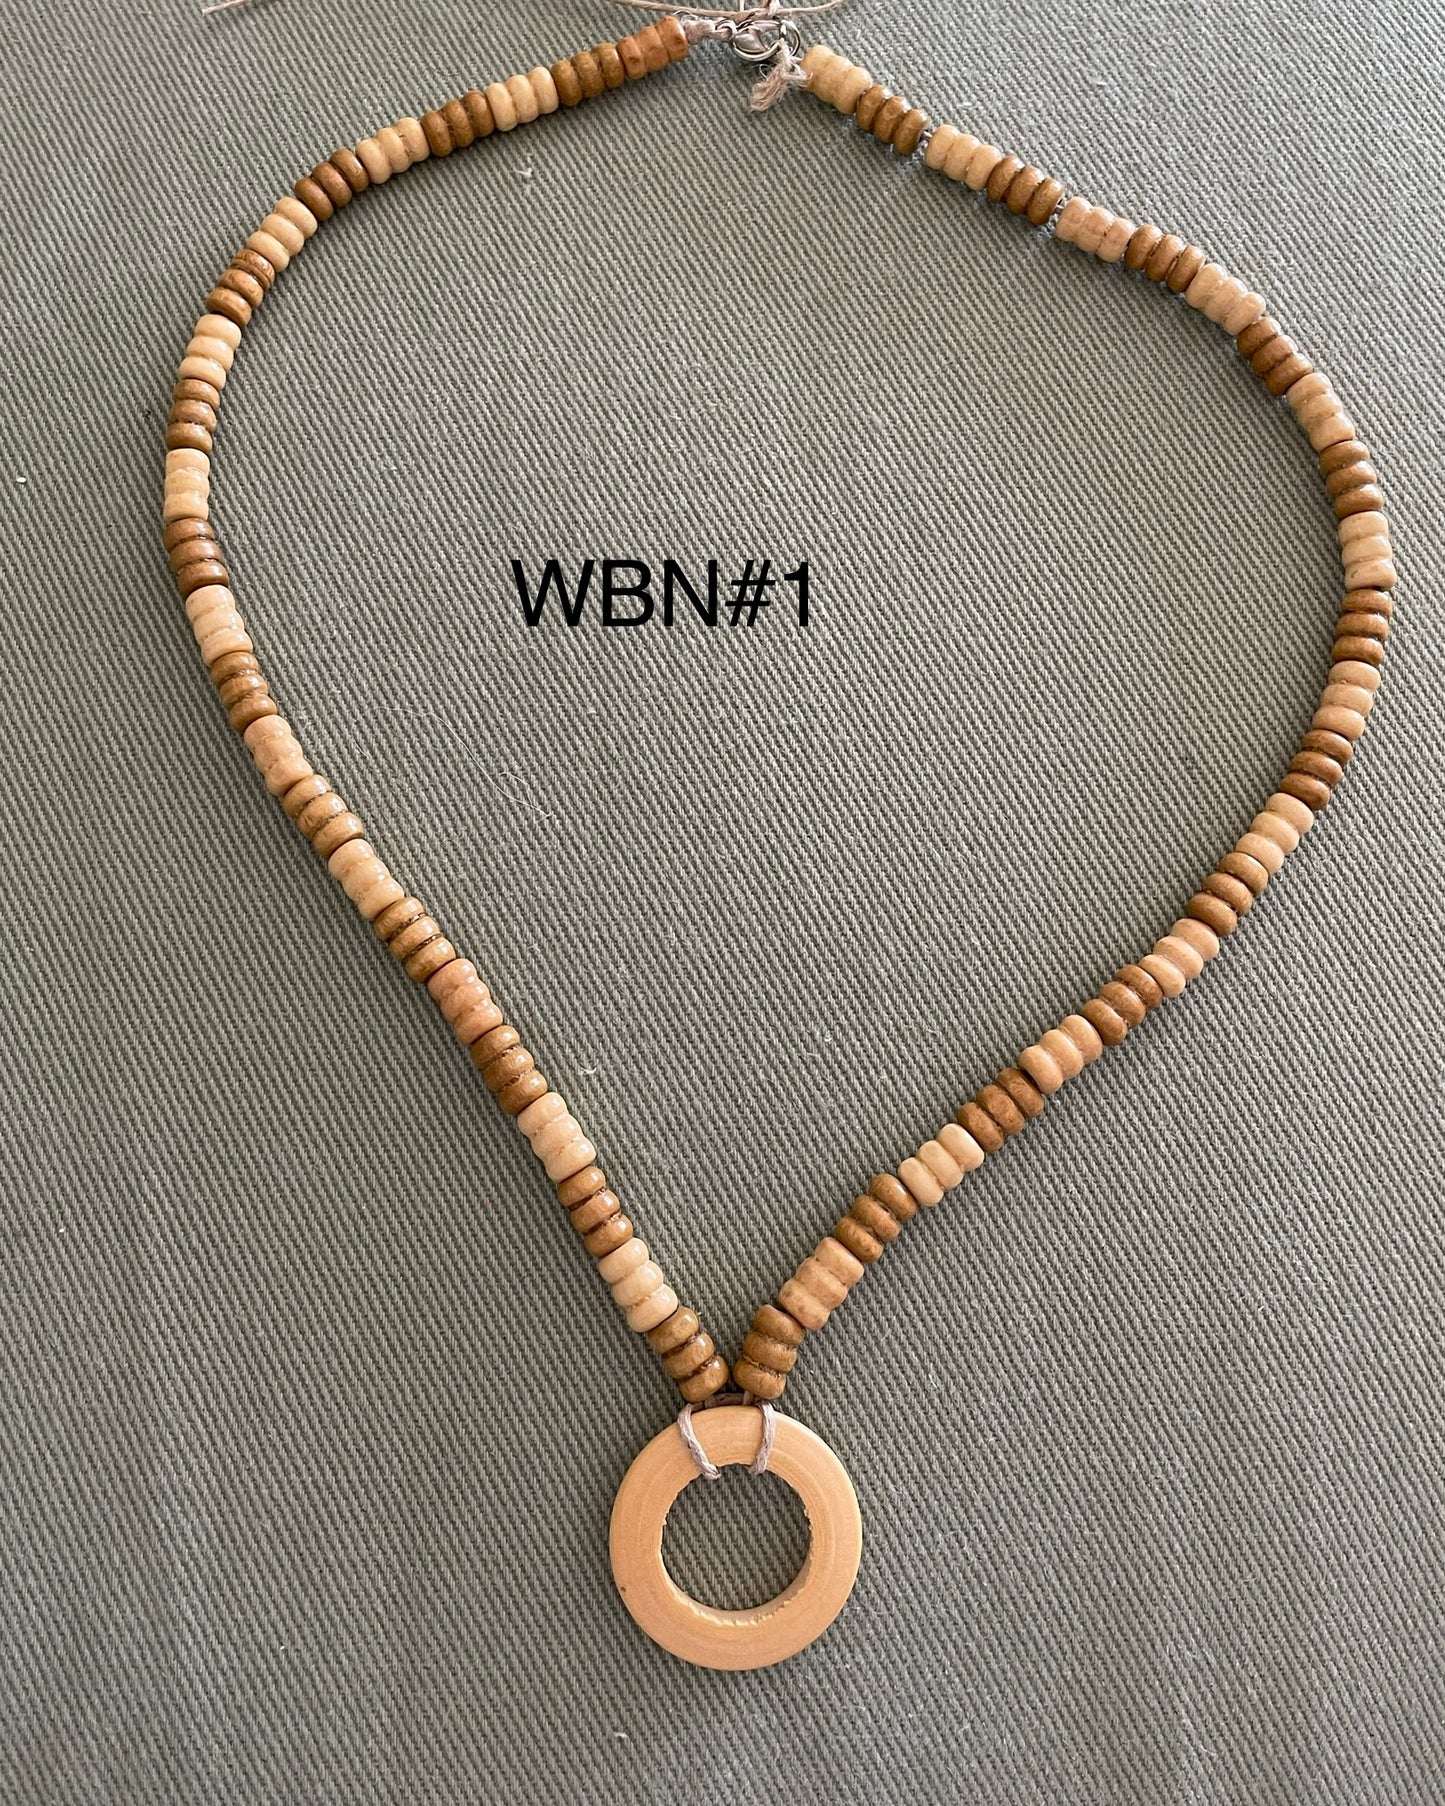 Wood Bead Necklace WBN1